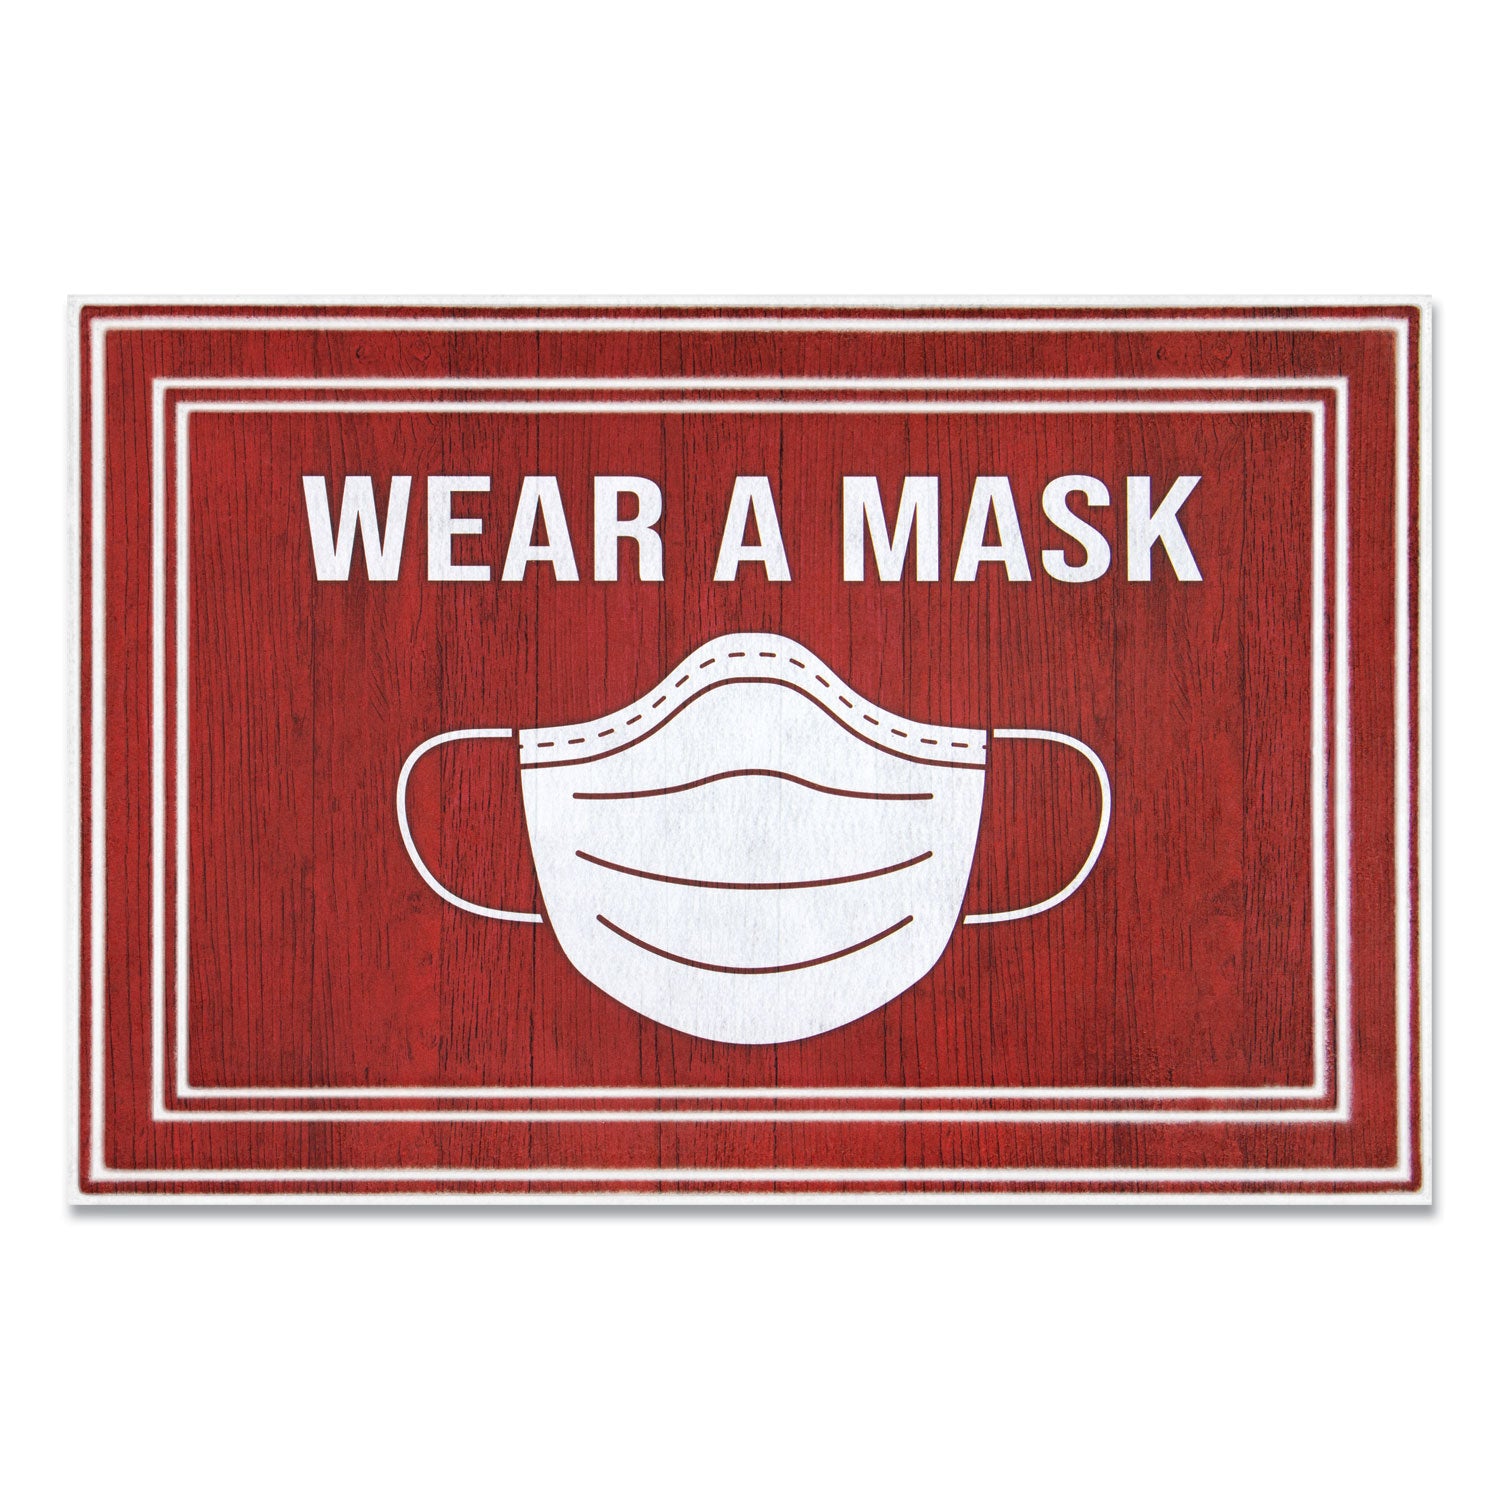 message-floor-mats-24-x-36-red-white-wear-a-mask_aph3984528842x3 - 1